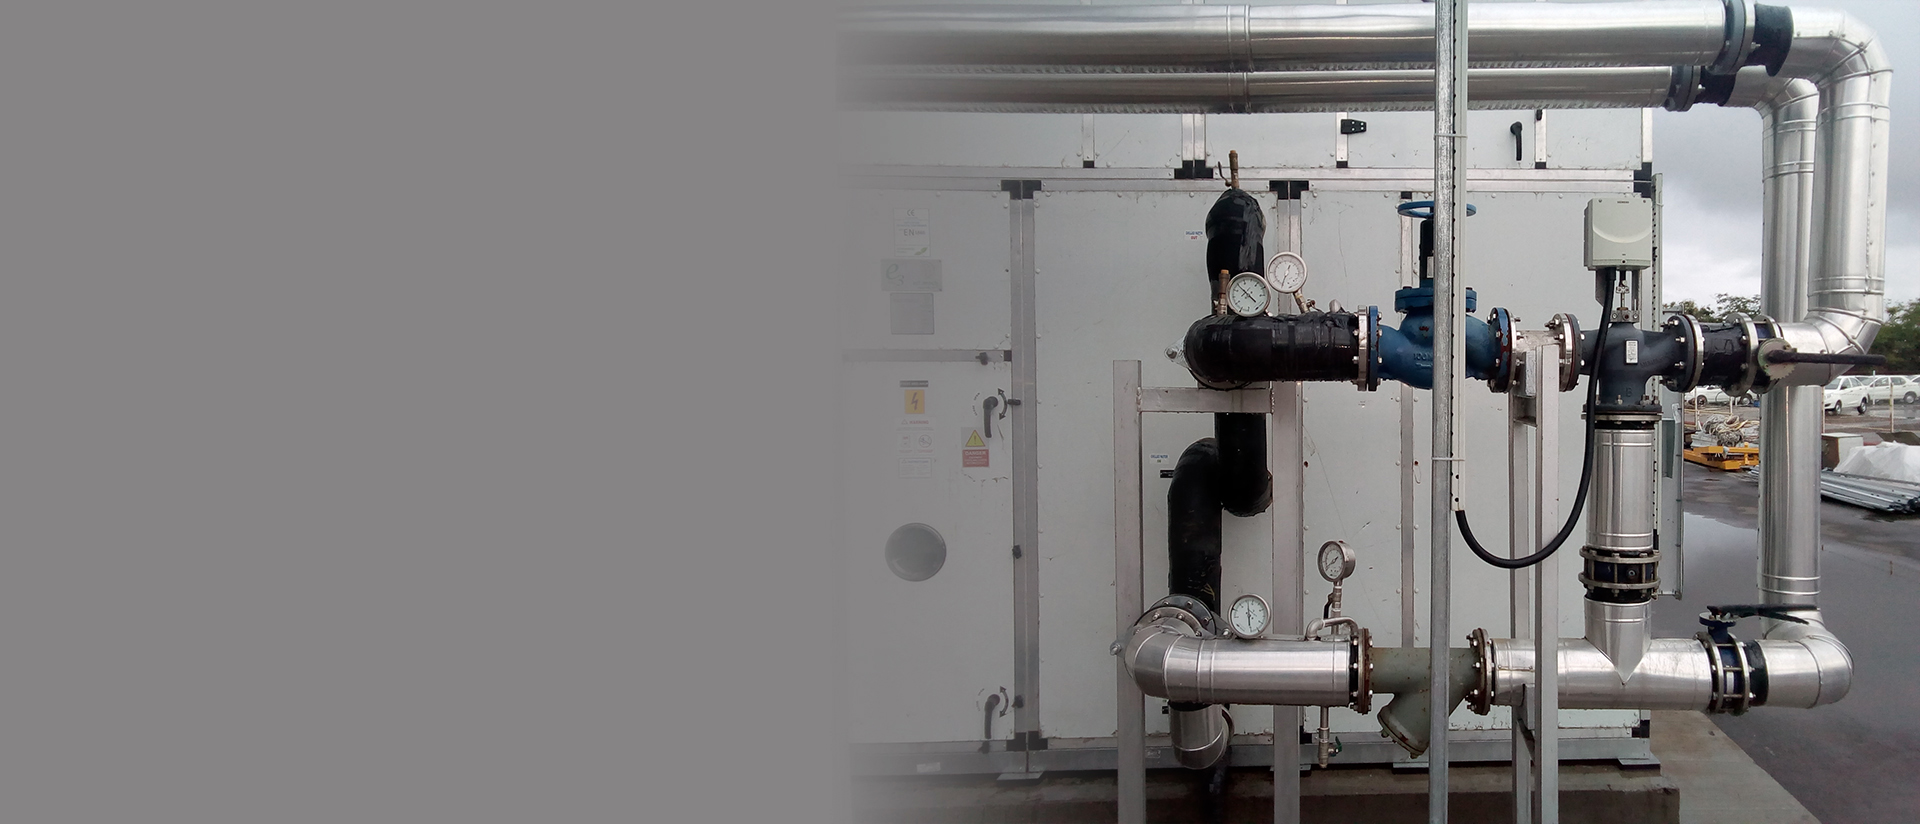 AHU - Chilled water manifold with SS piping & insulation